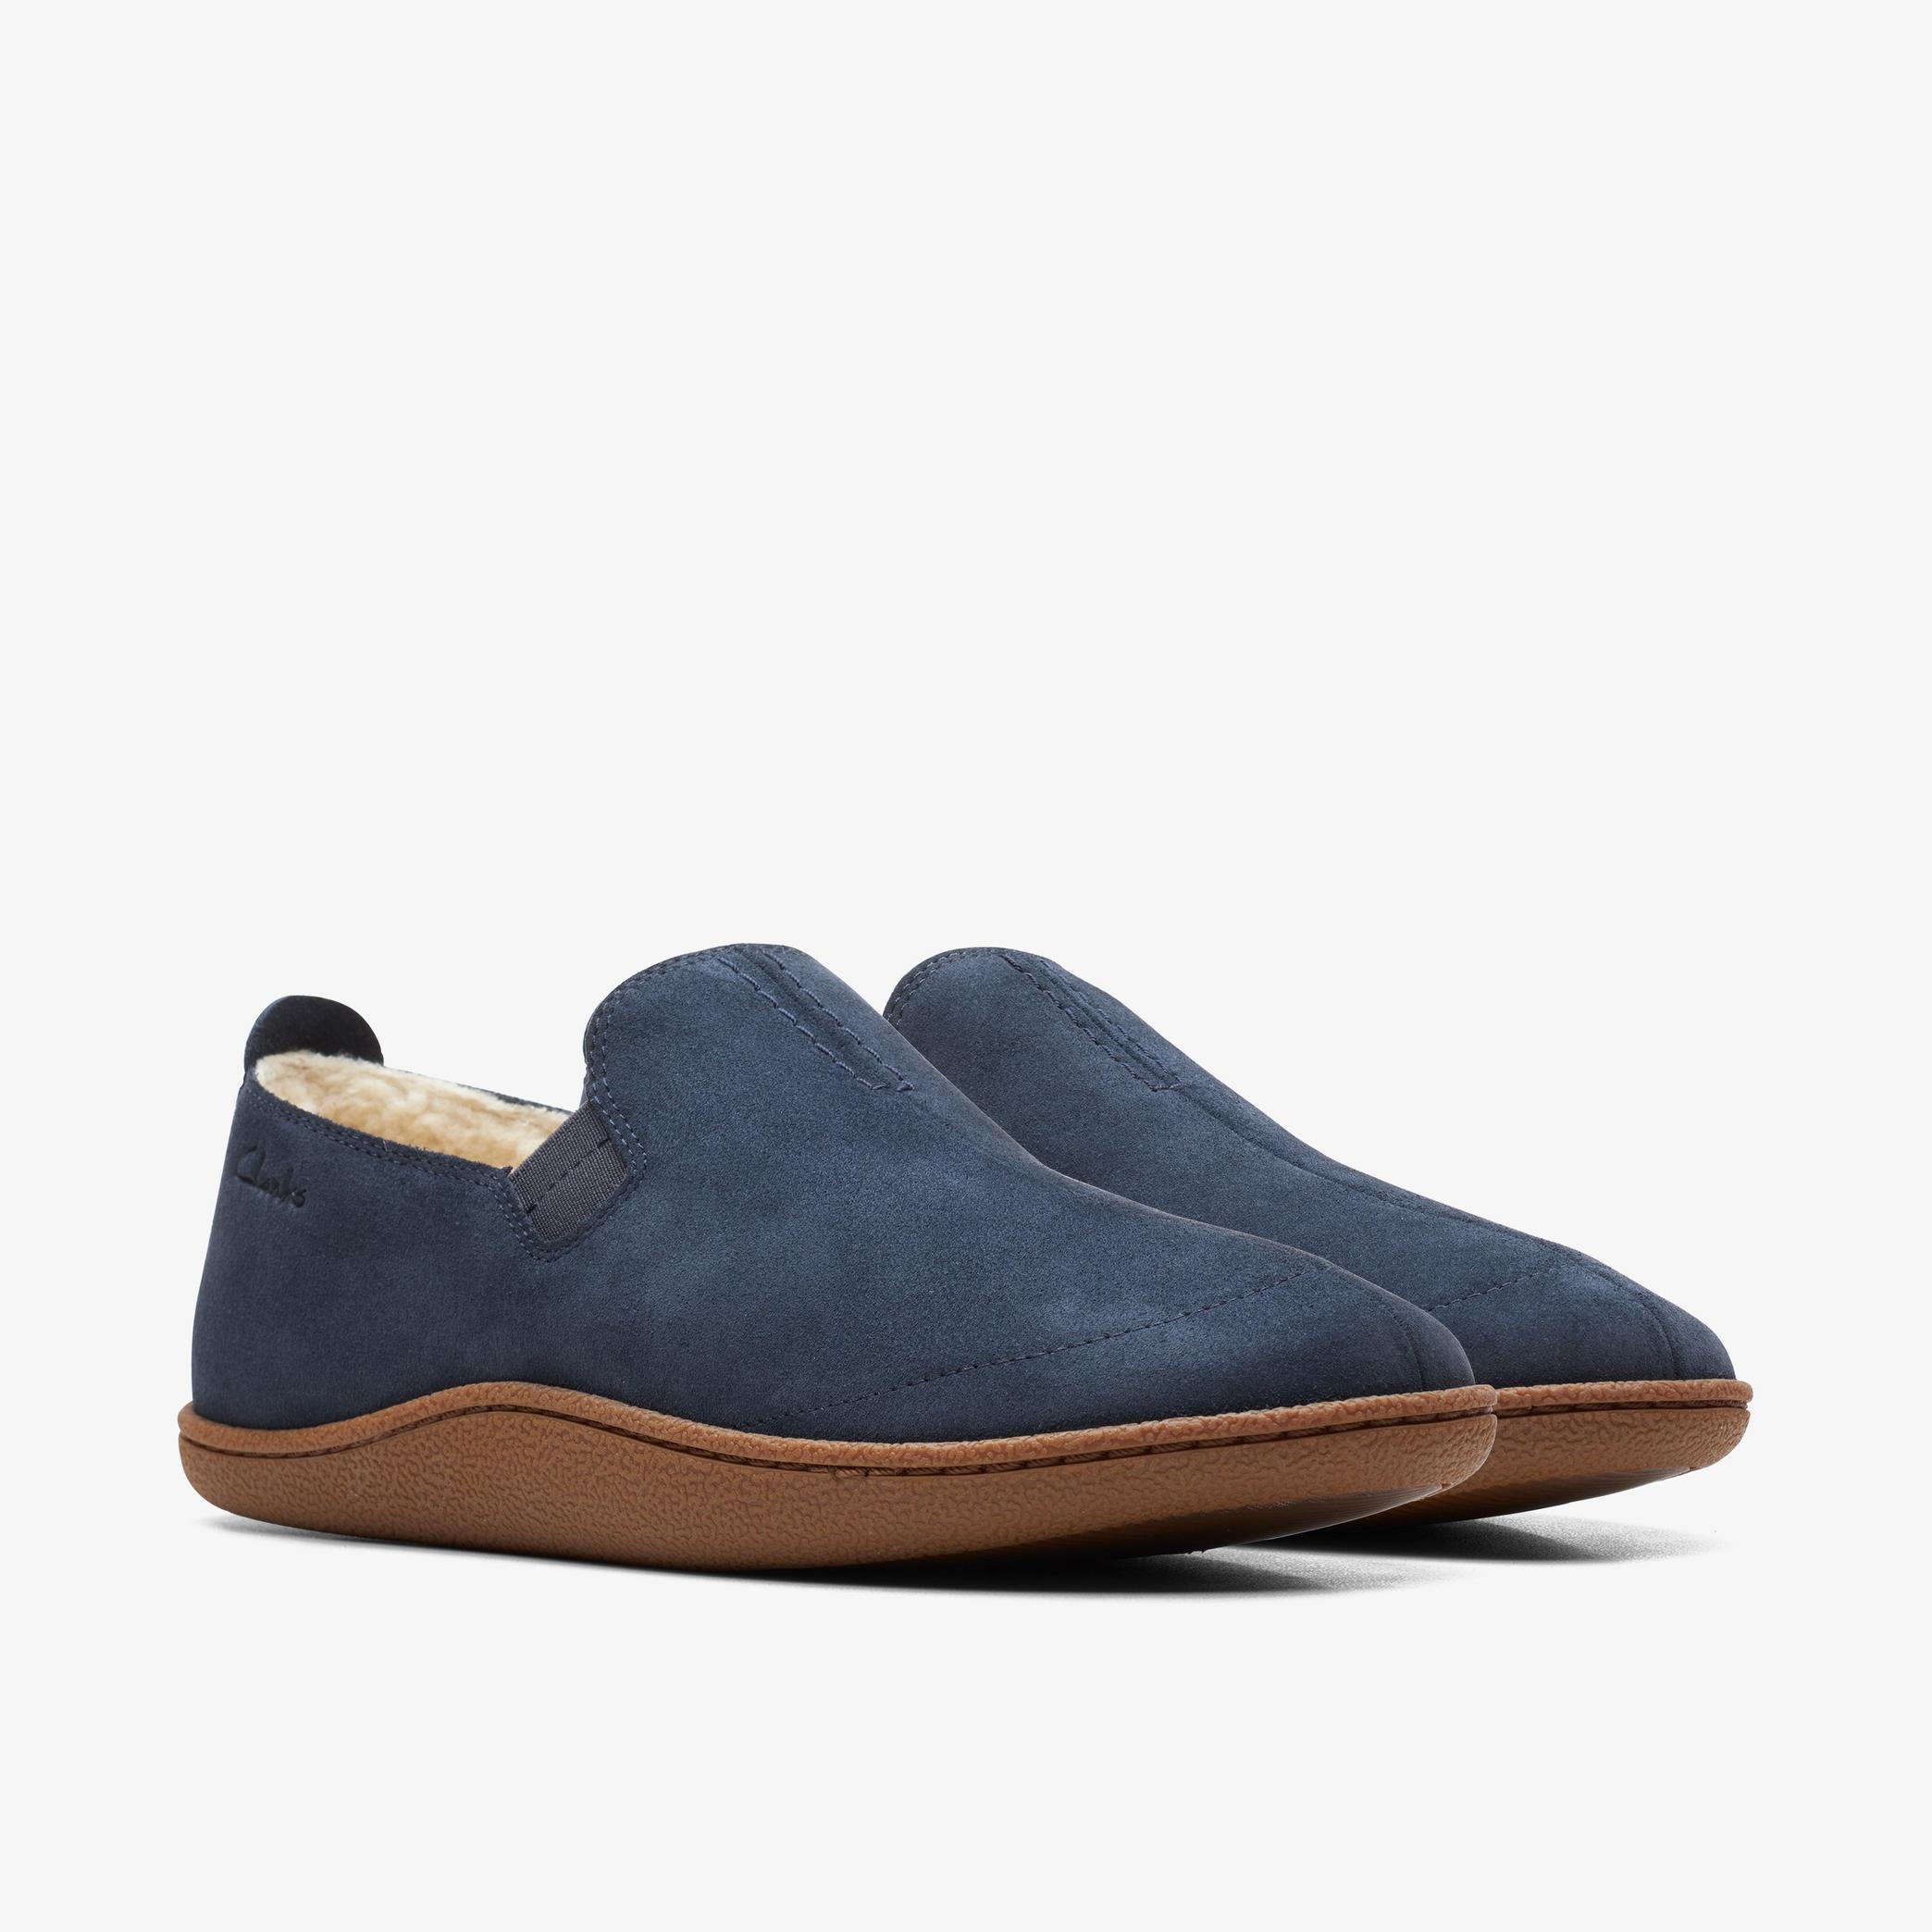 Home Mocc Navy Suede Slippers, view 4 of 6